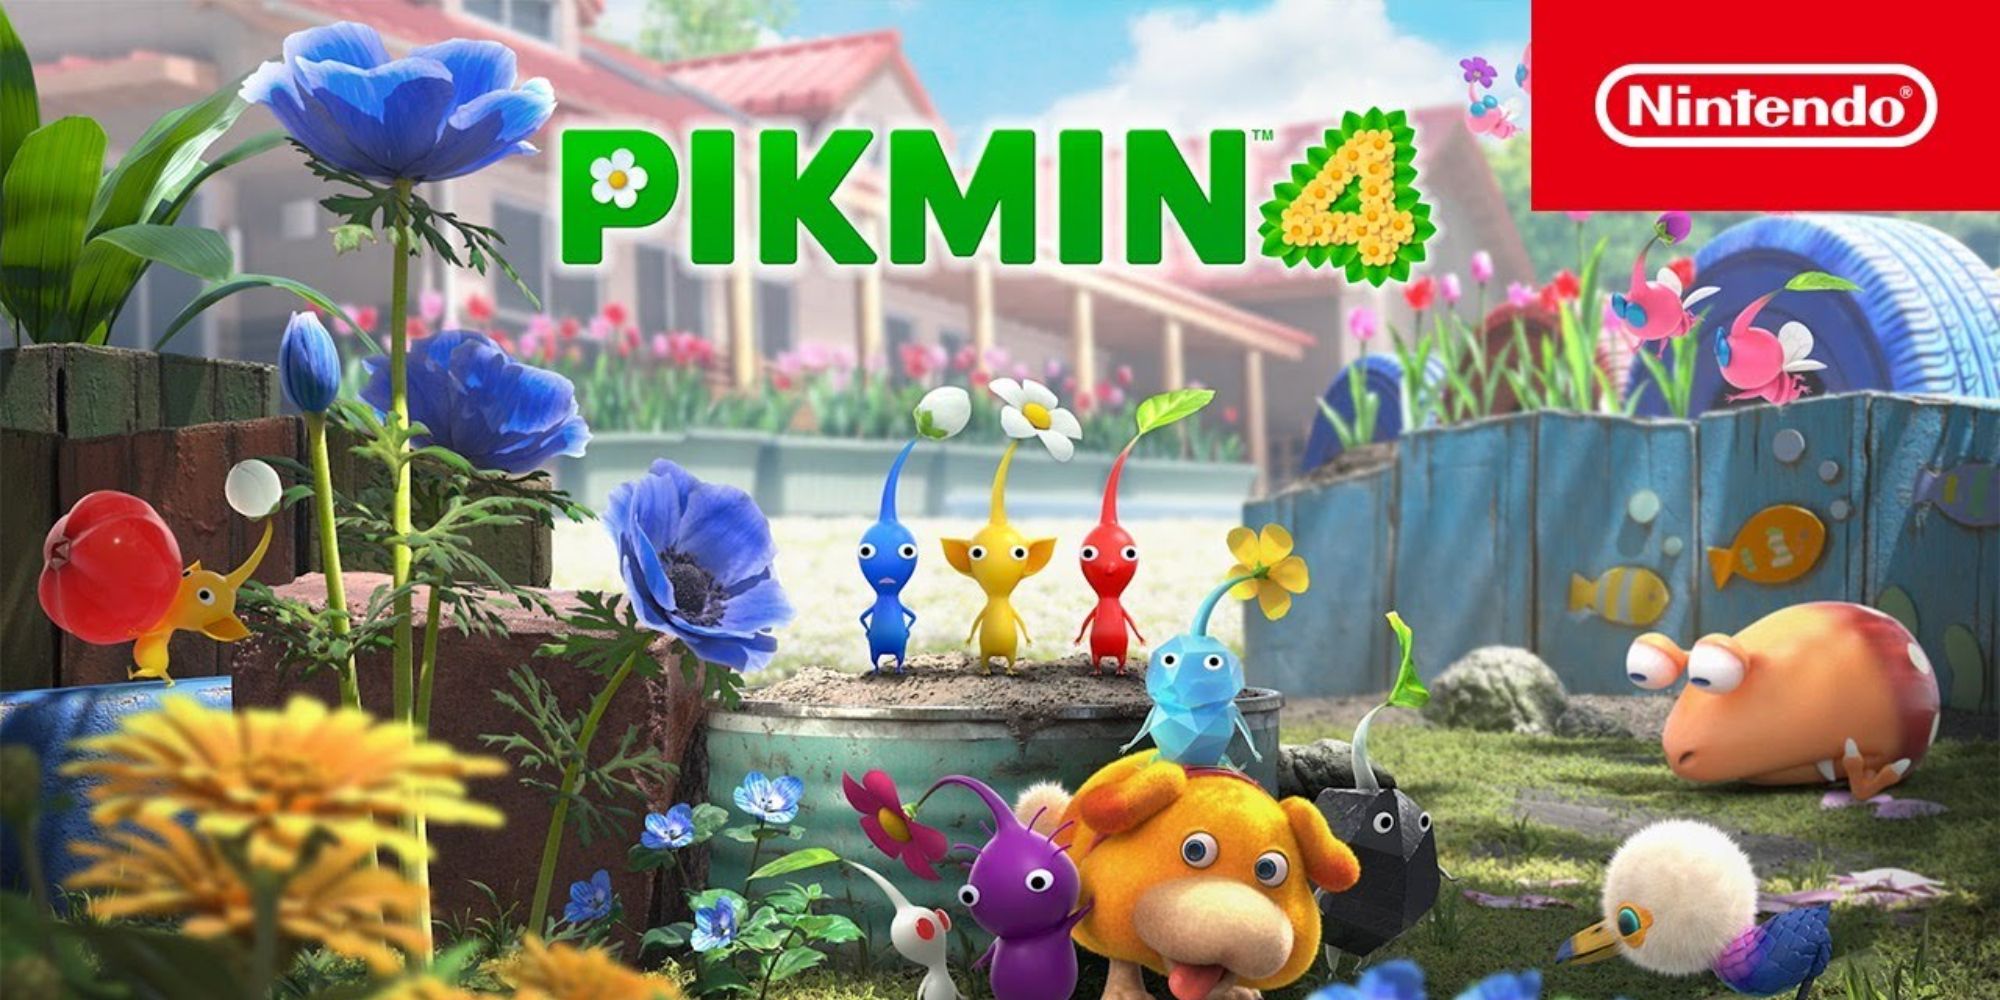 Pikmin 4 official cover, with a gathering of Pikmins peering out from a colorful garden